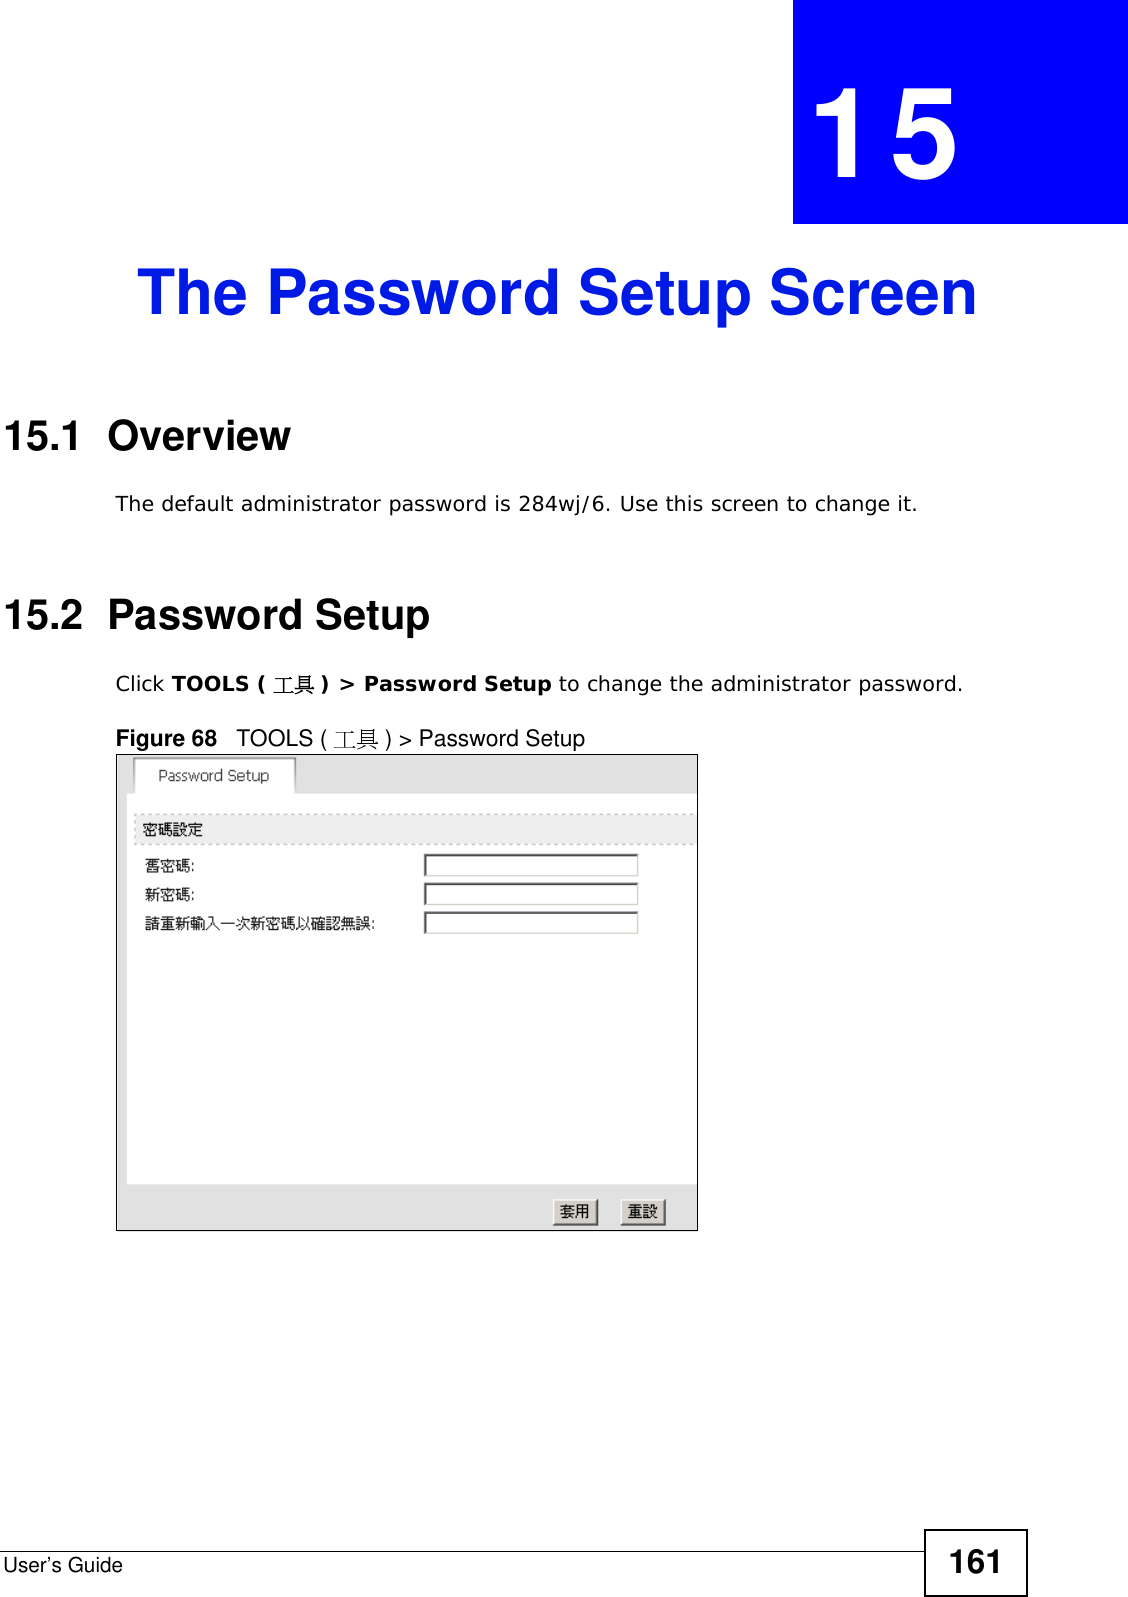 User’s Guide 161CHAPTER  15 The Password Setup Screen15.1  OverviewThe default administrator password is 284wj/6. Use this screen to change it.15.2  Password SetupClick TOOLS ( 工具 ) &gt; Password Setup to change the administrator password.Figure 68   TOOLS ( 工具 ) &gt; Password Setup